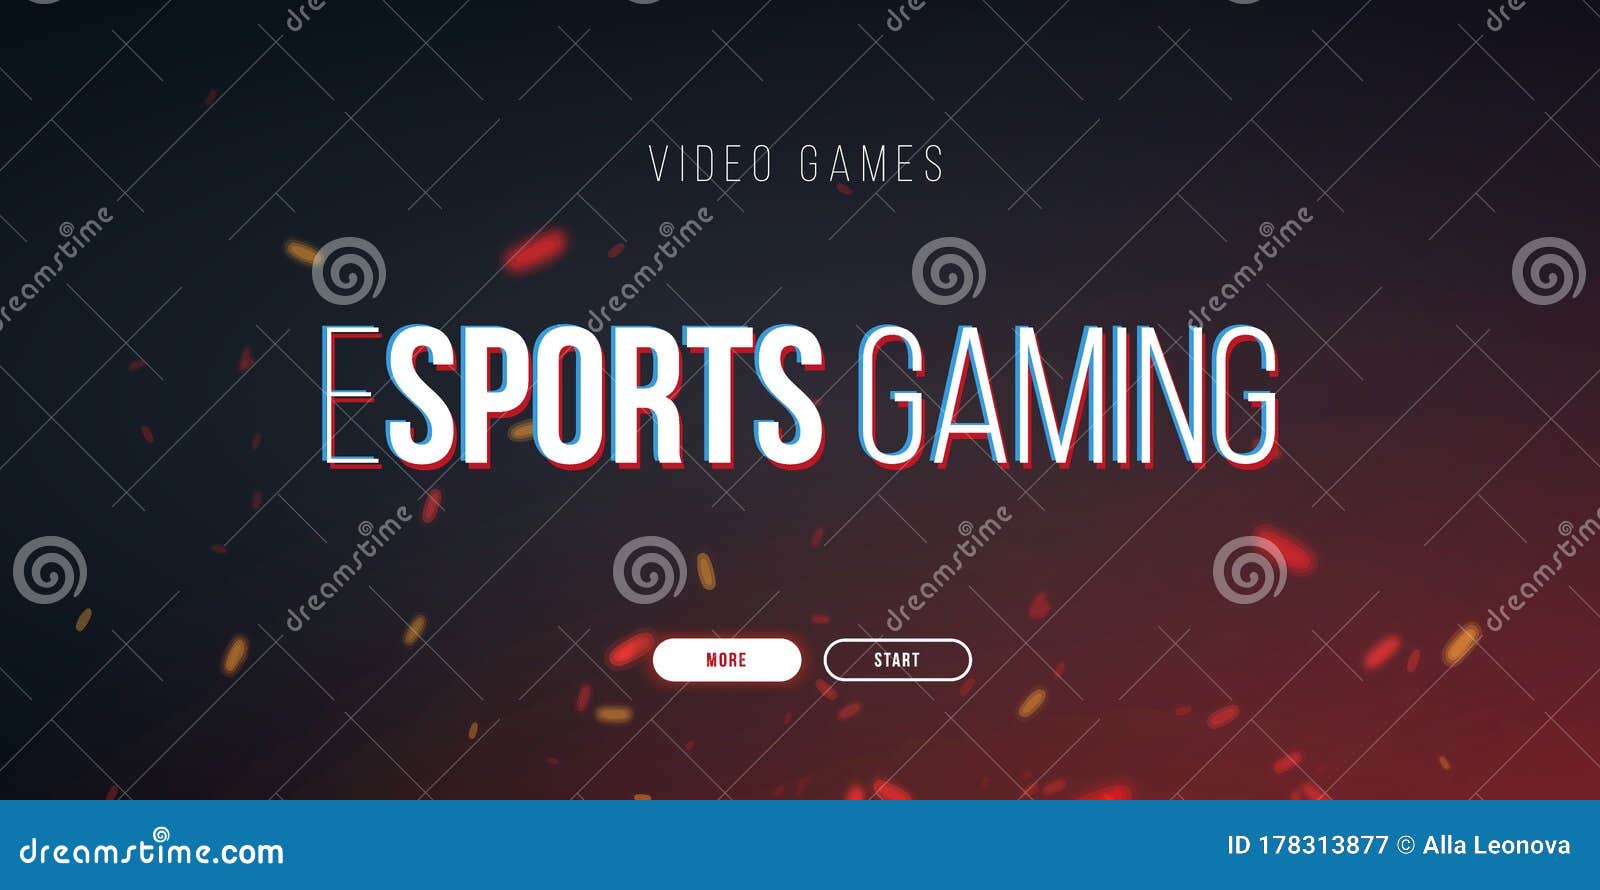 Cyber Sport Banner with Glitch Effect. Esports Gaming